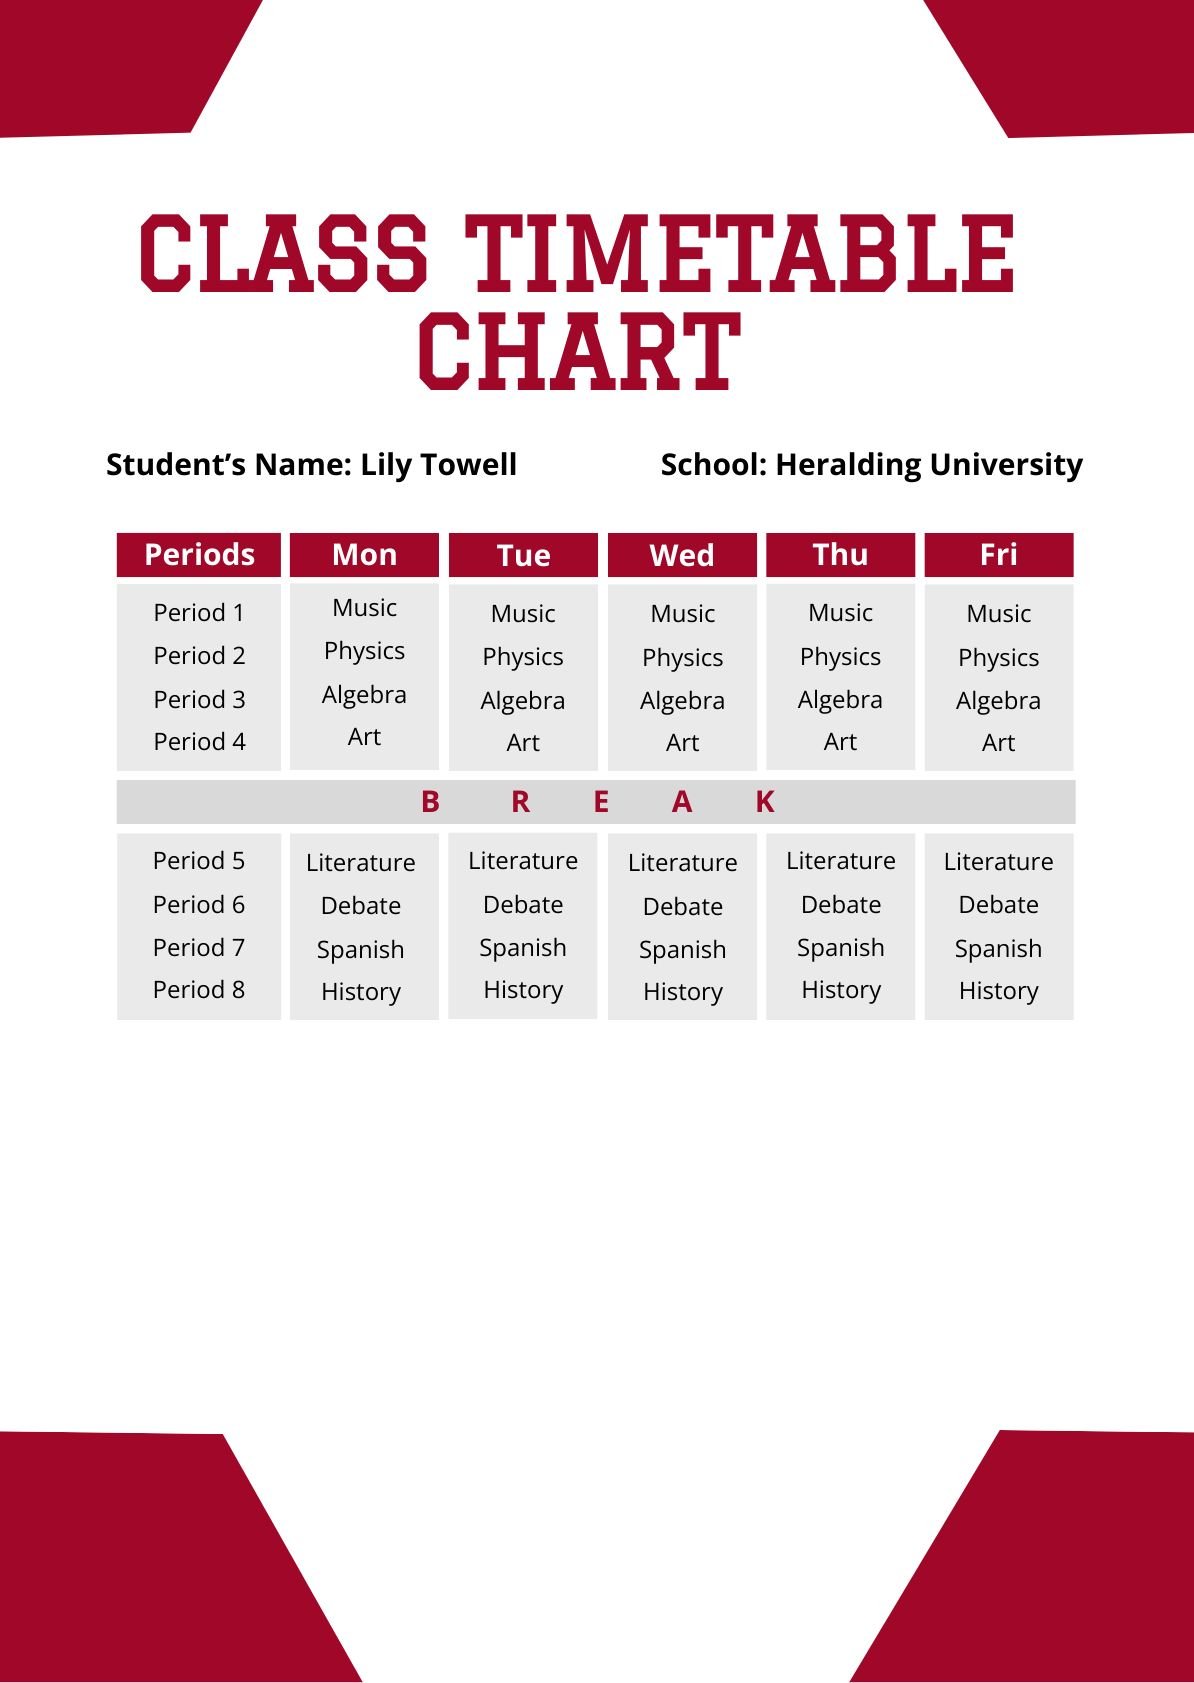 Free Class Timetable Chart in PDF